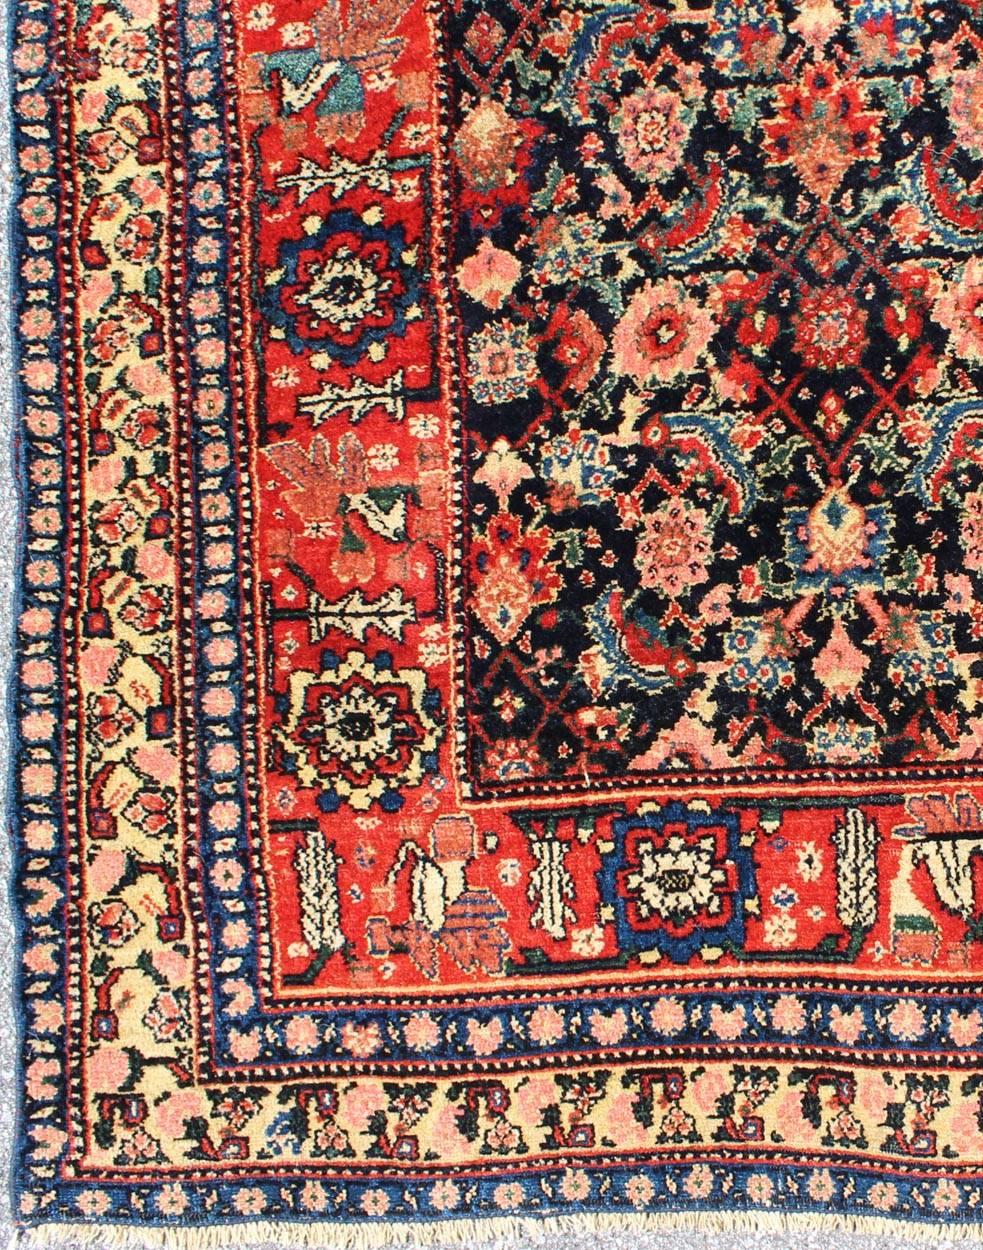 This piece is a Northwest Persian Bidjar carpet with a navy field decorated by red lattice-work and various flowers in shades of coral, sky blue, green, light camel, mahogany, ivory and red. Ivory and sky blue speckling appears in some of the